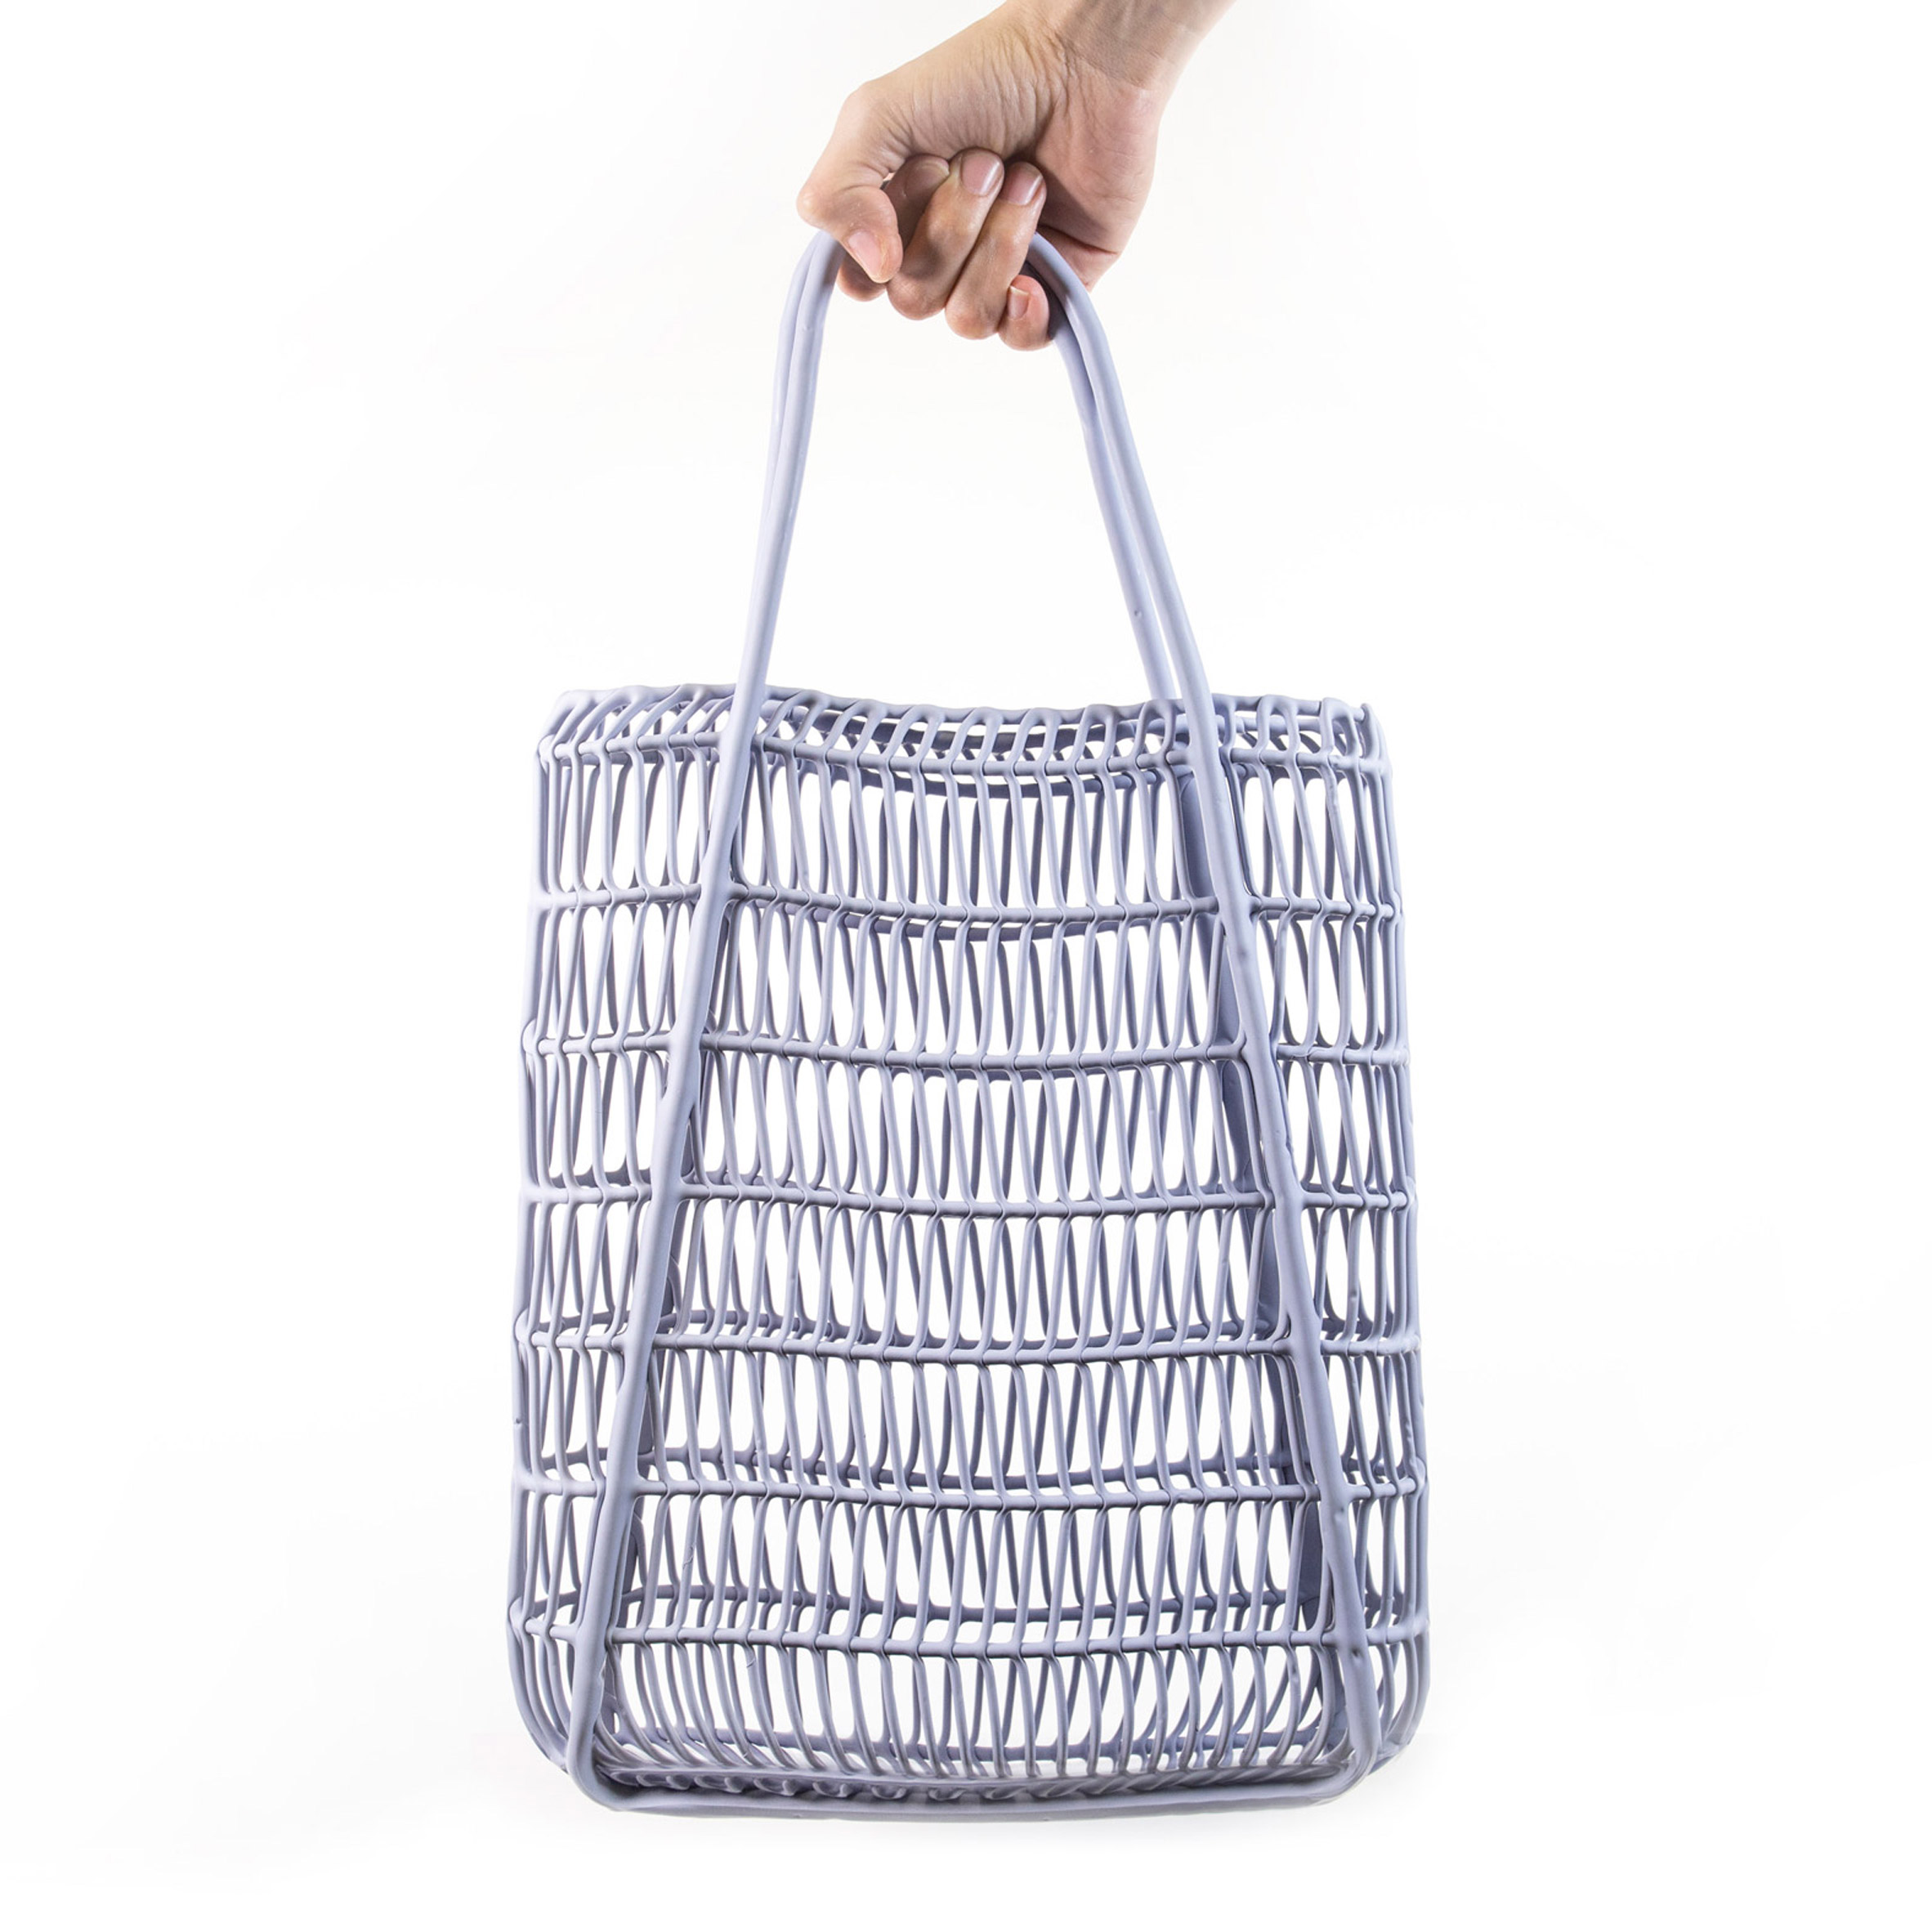 Liquid Printed Bag and Lamp by MIT Self-Assembly Lab and Christophe Guberan